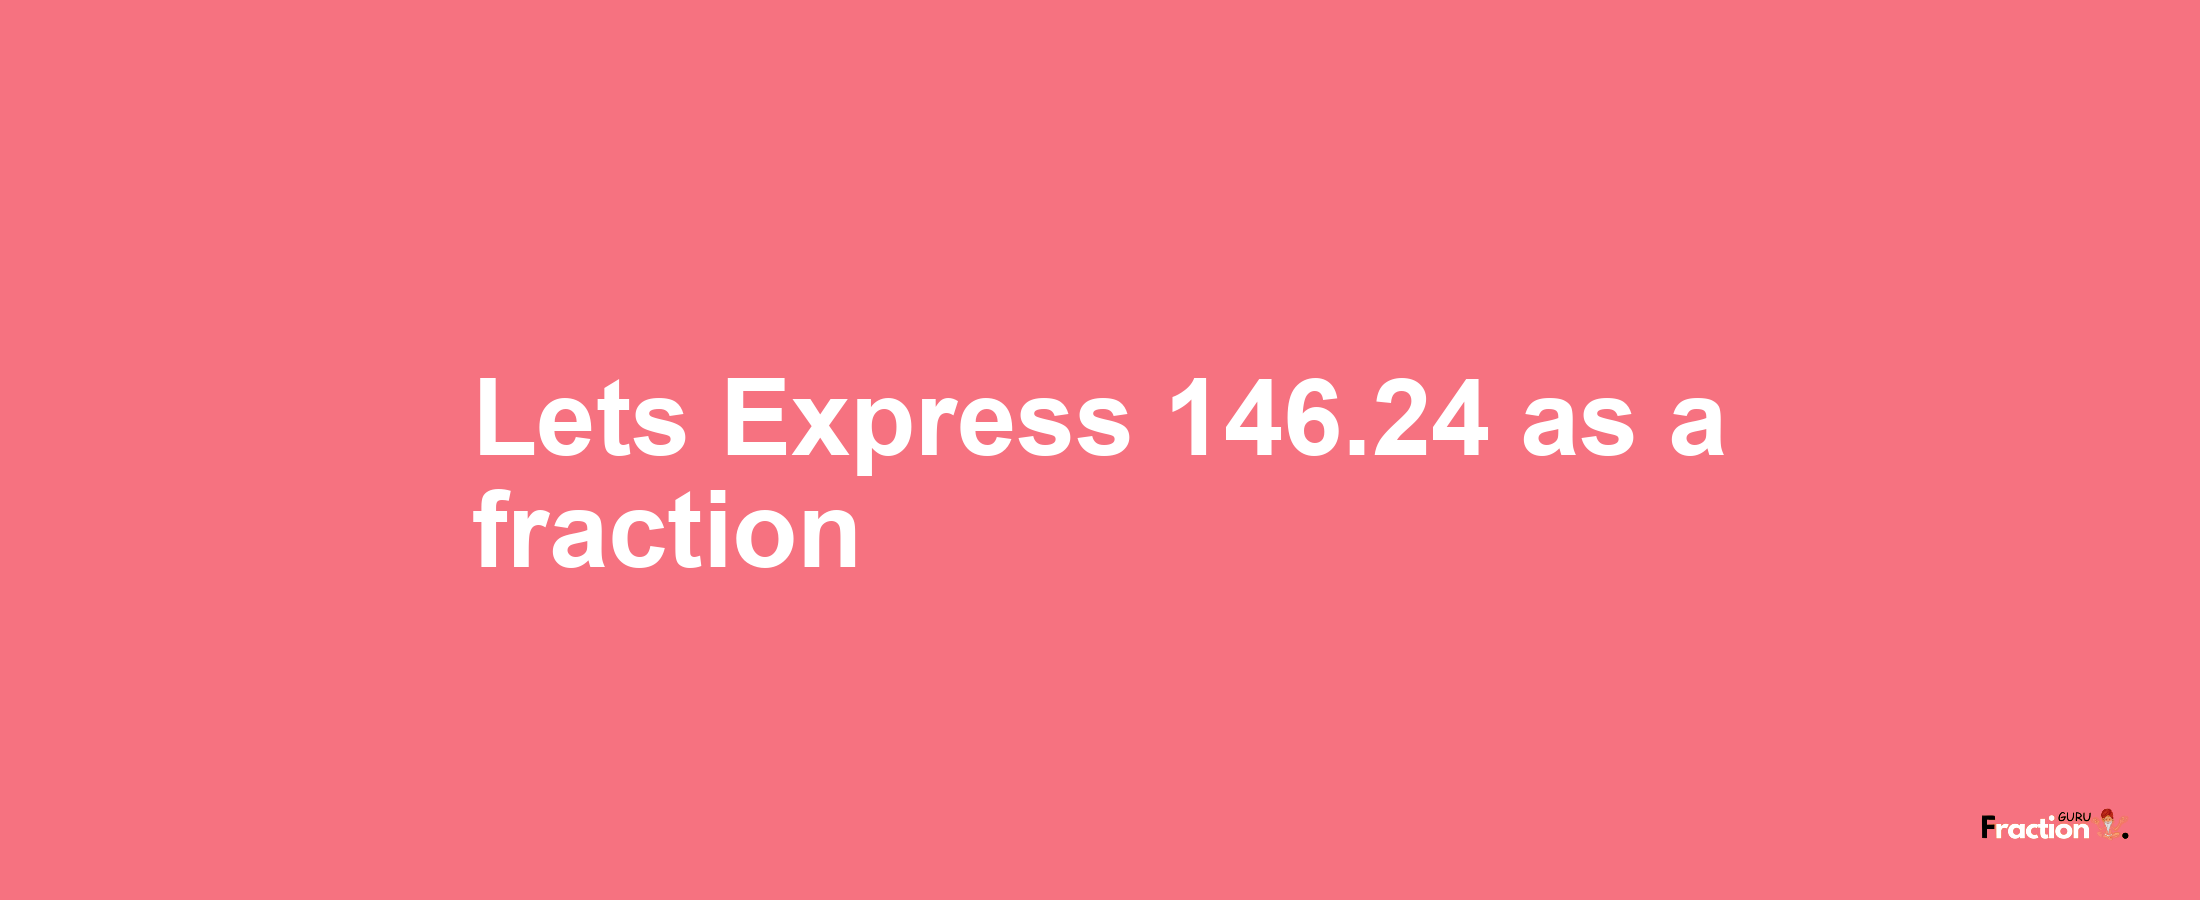 Lets Express 146.24 as afraction